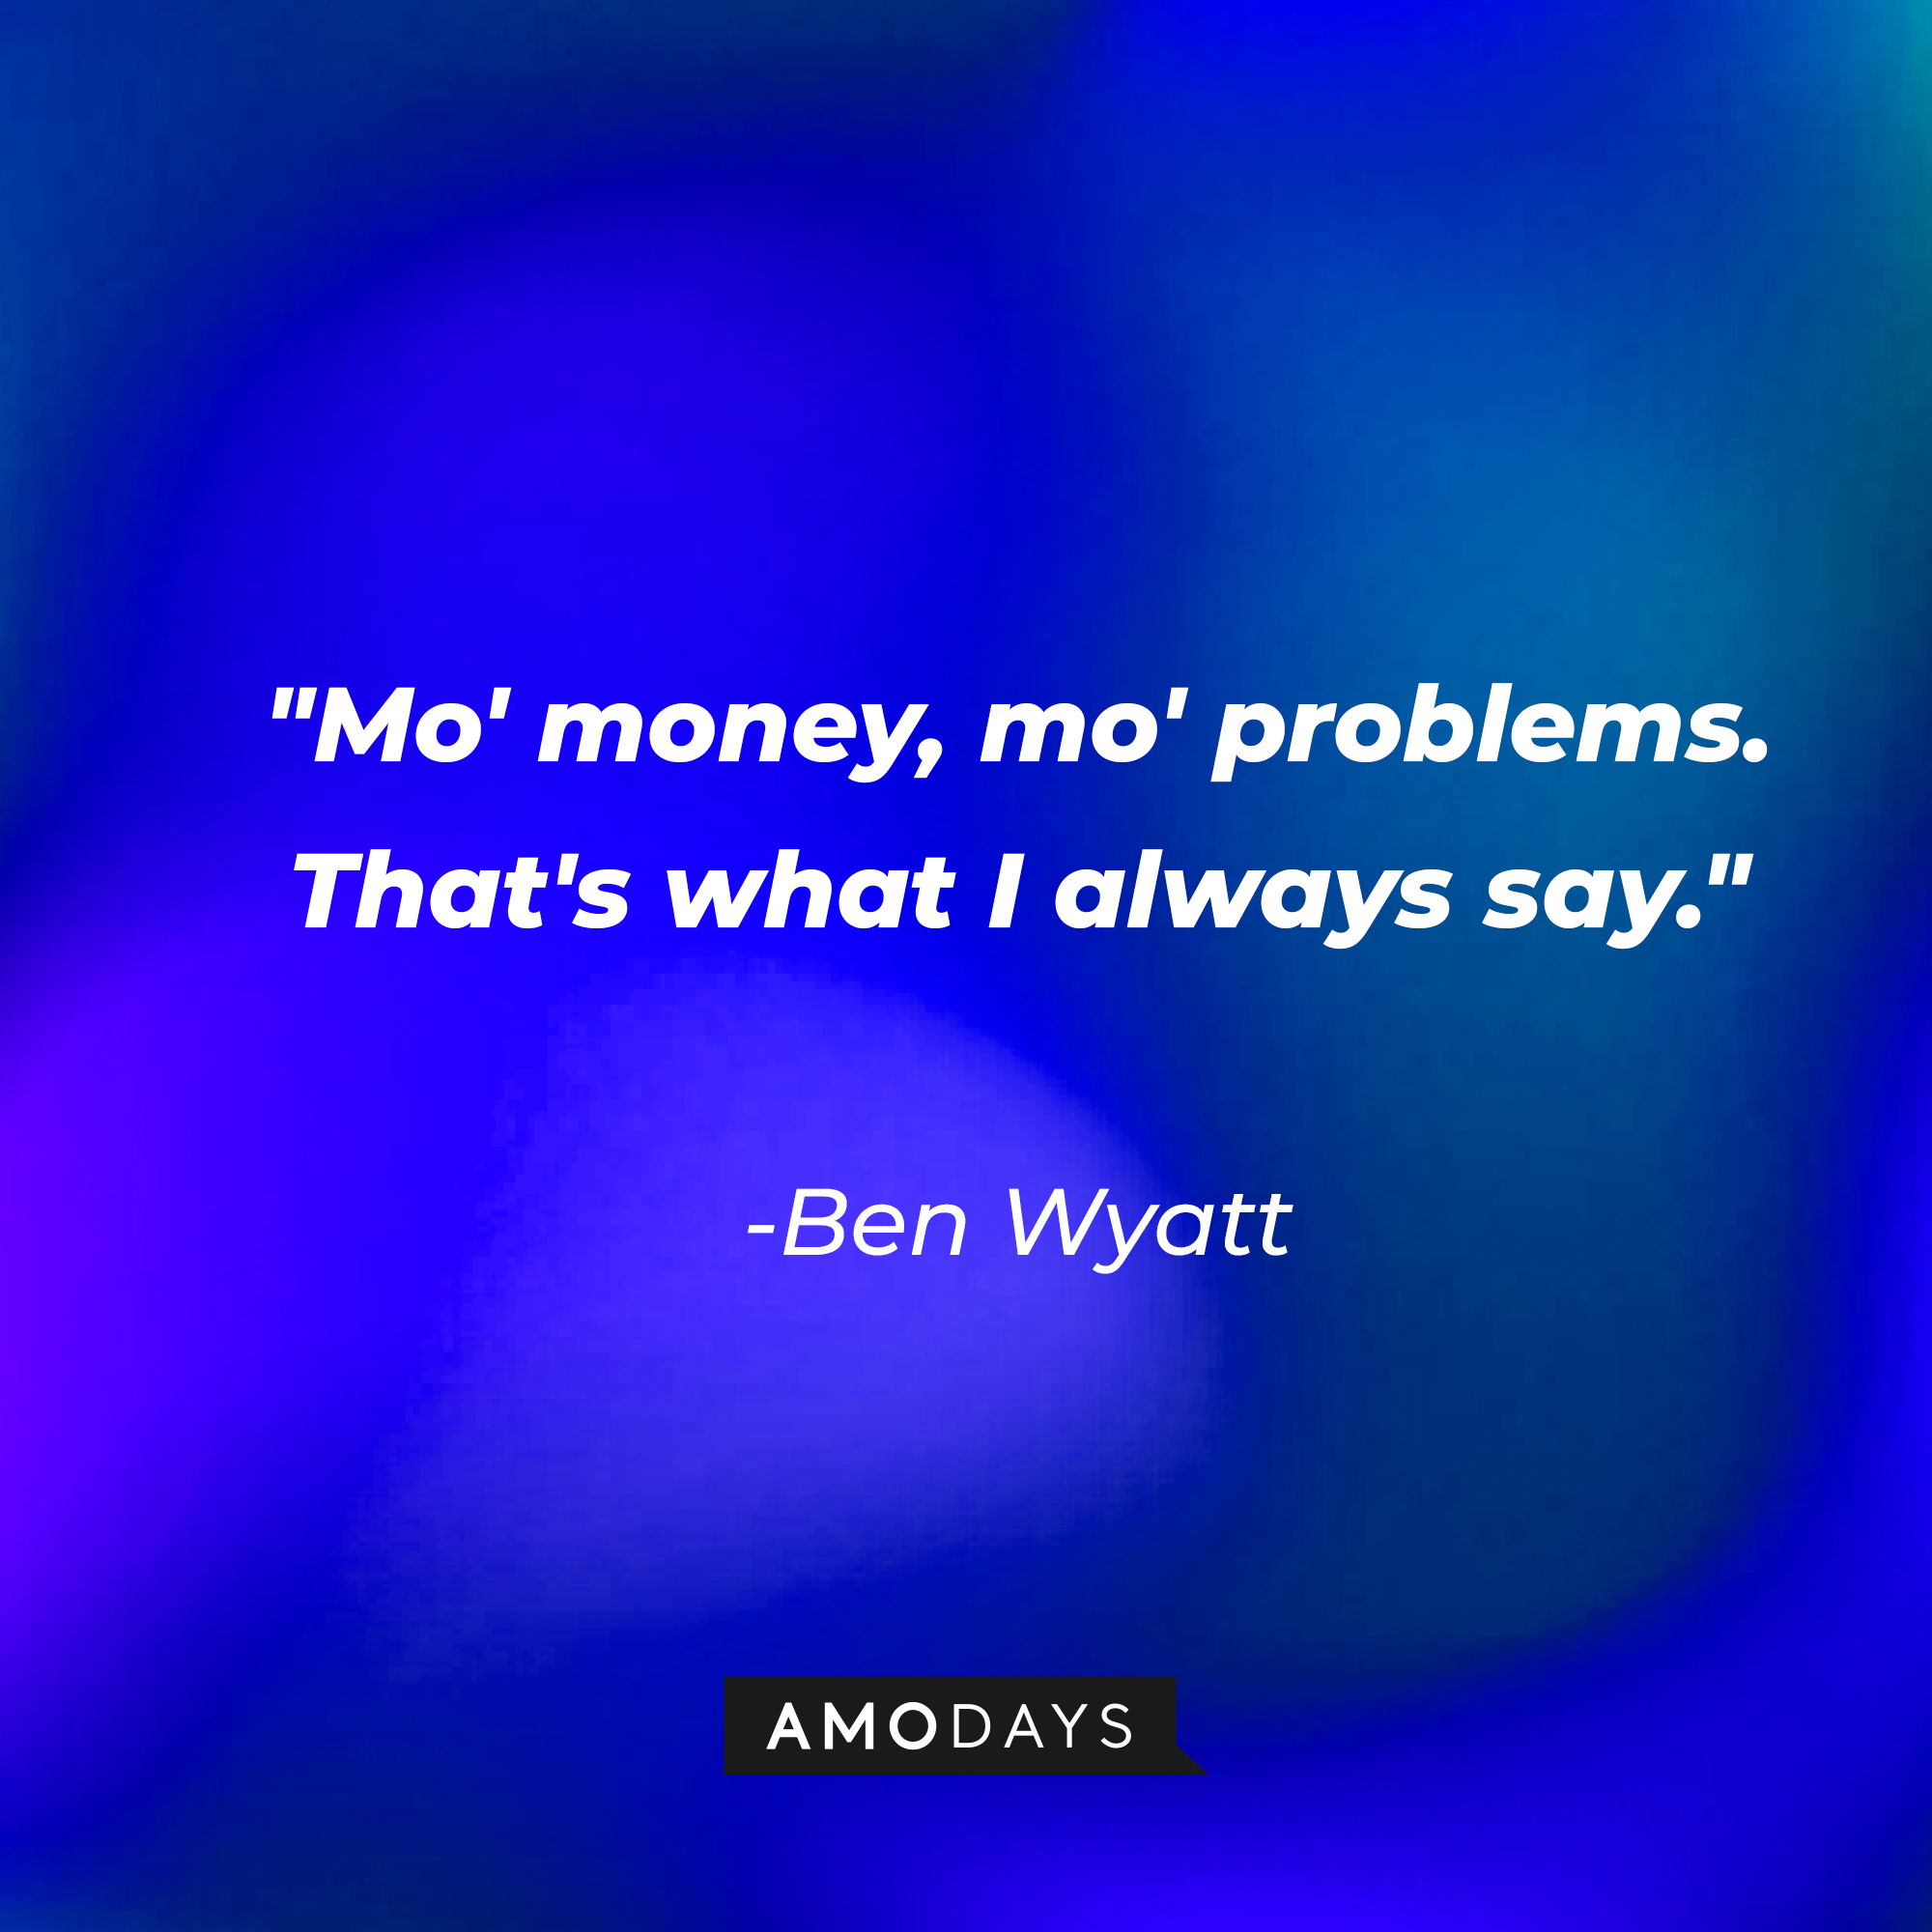 Ben Wyatt's quote: "Mo' money, mo' problems. That's what I always say." | Source: AmoDays